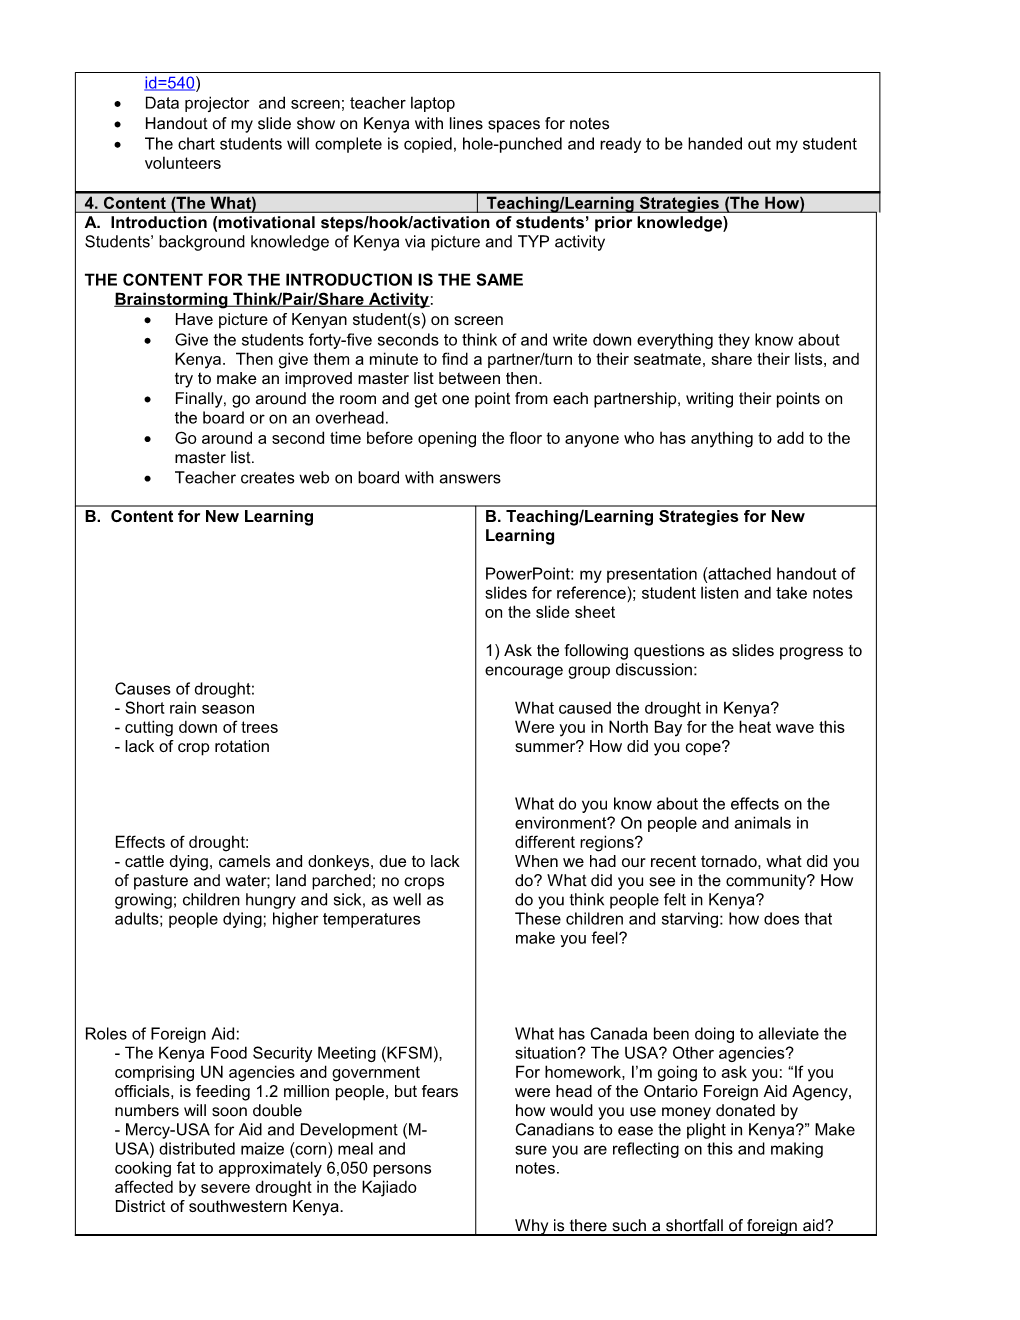 Direct Instruction Planning Format - Guidelines